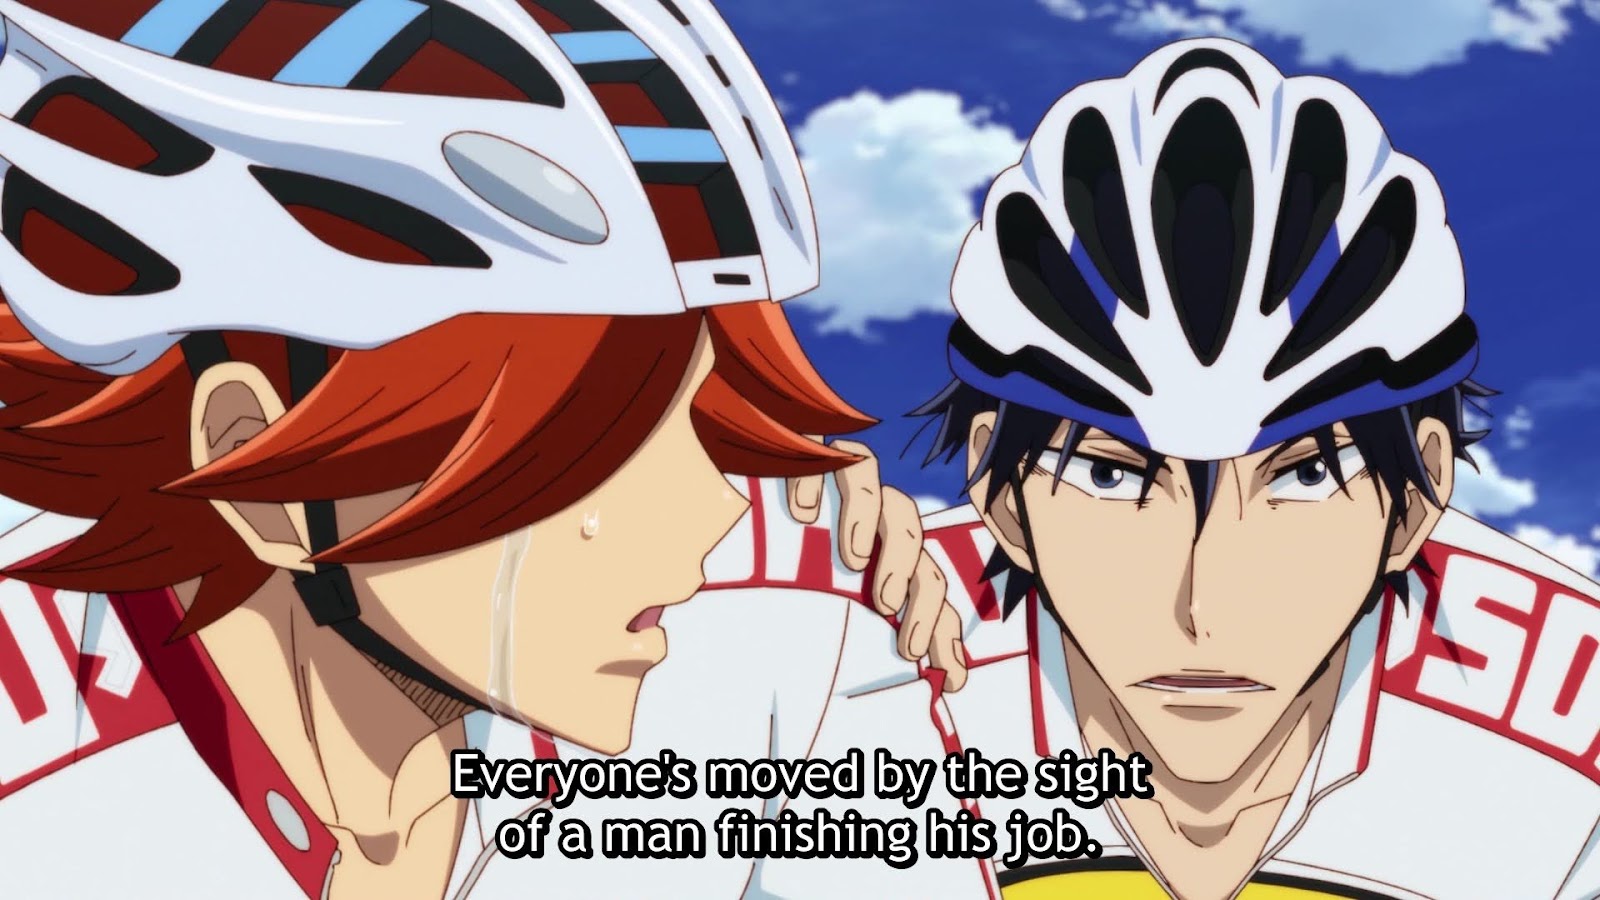 Yowamushi Pedal Limit Break ends on March 25 with final two episodes  back-to-back